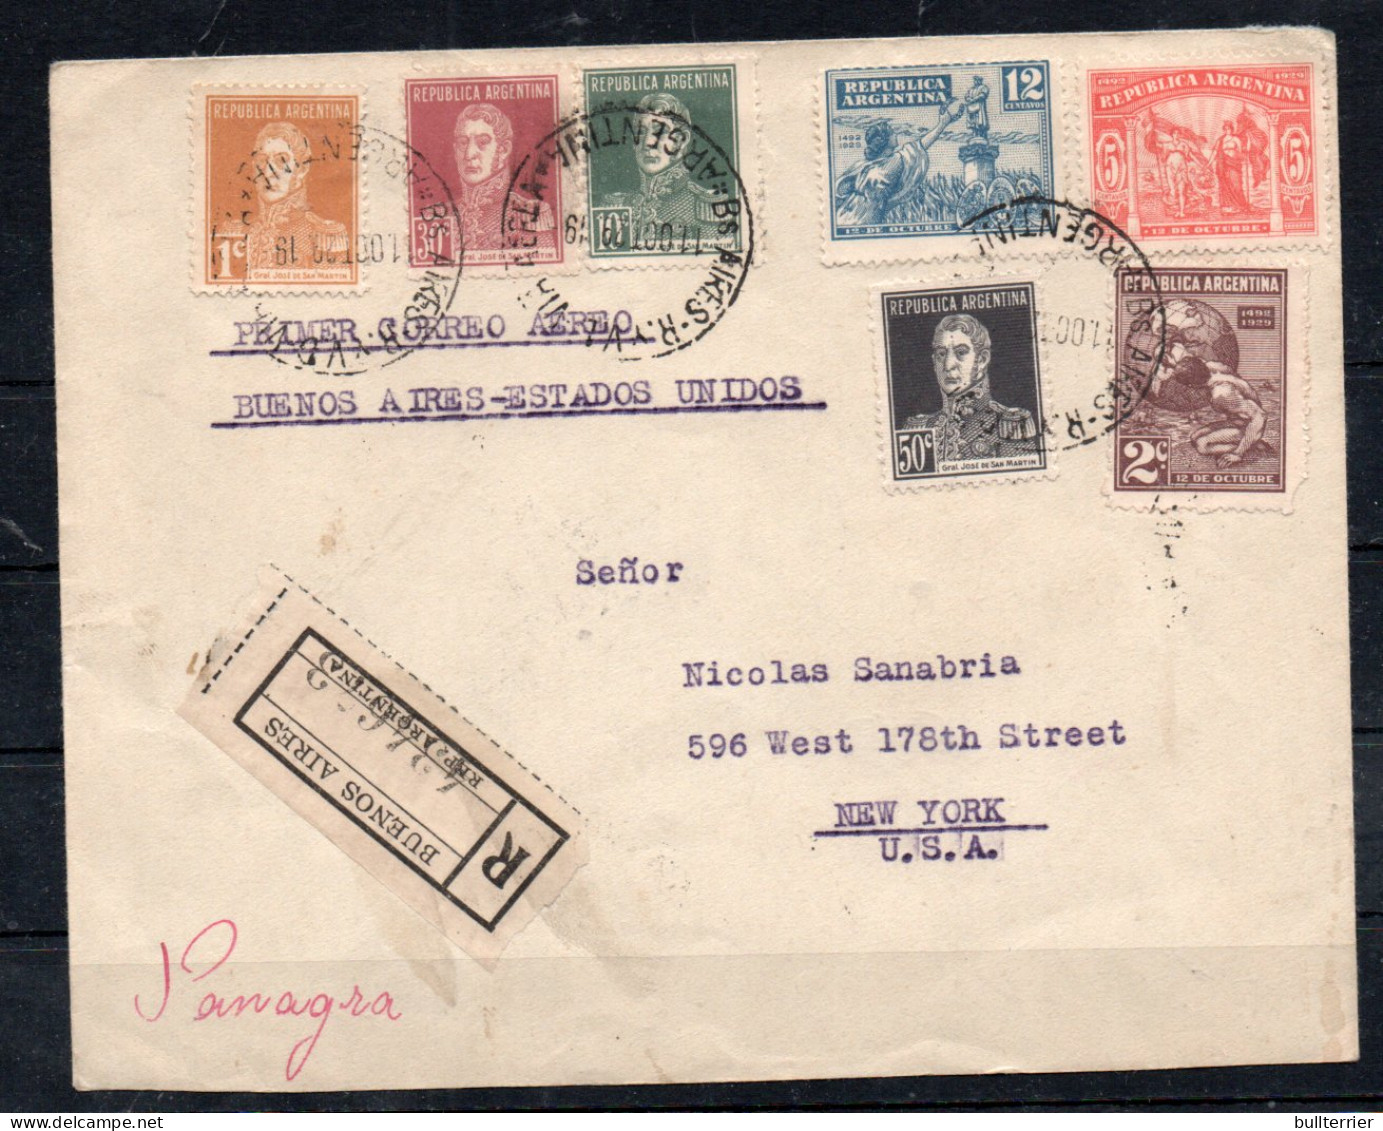 ARGENTINE - 1929  - PANAGRA REGISTERED  AIRMAIL COVER  TO NEW YORK  - Poste Aérienne